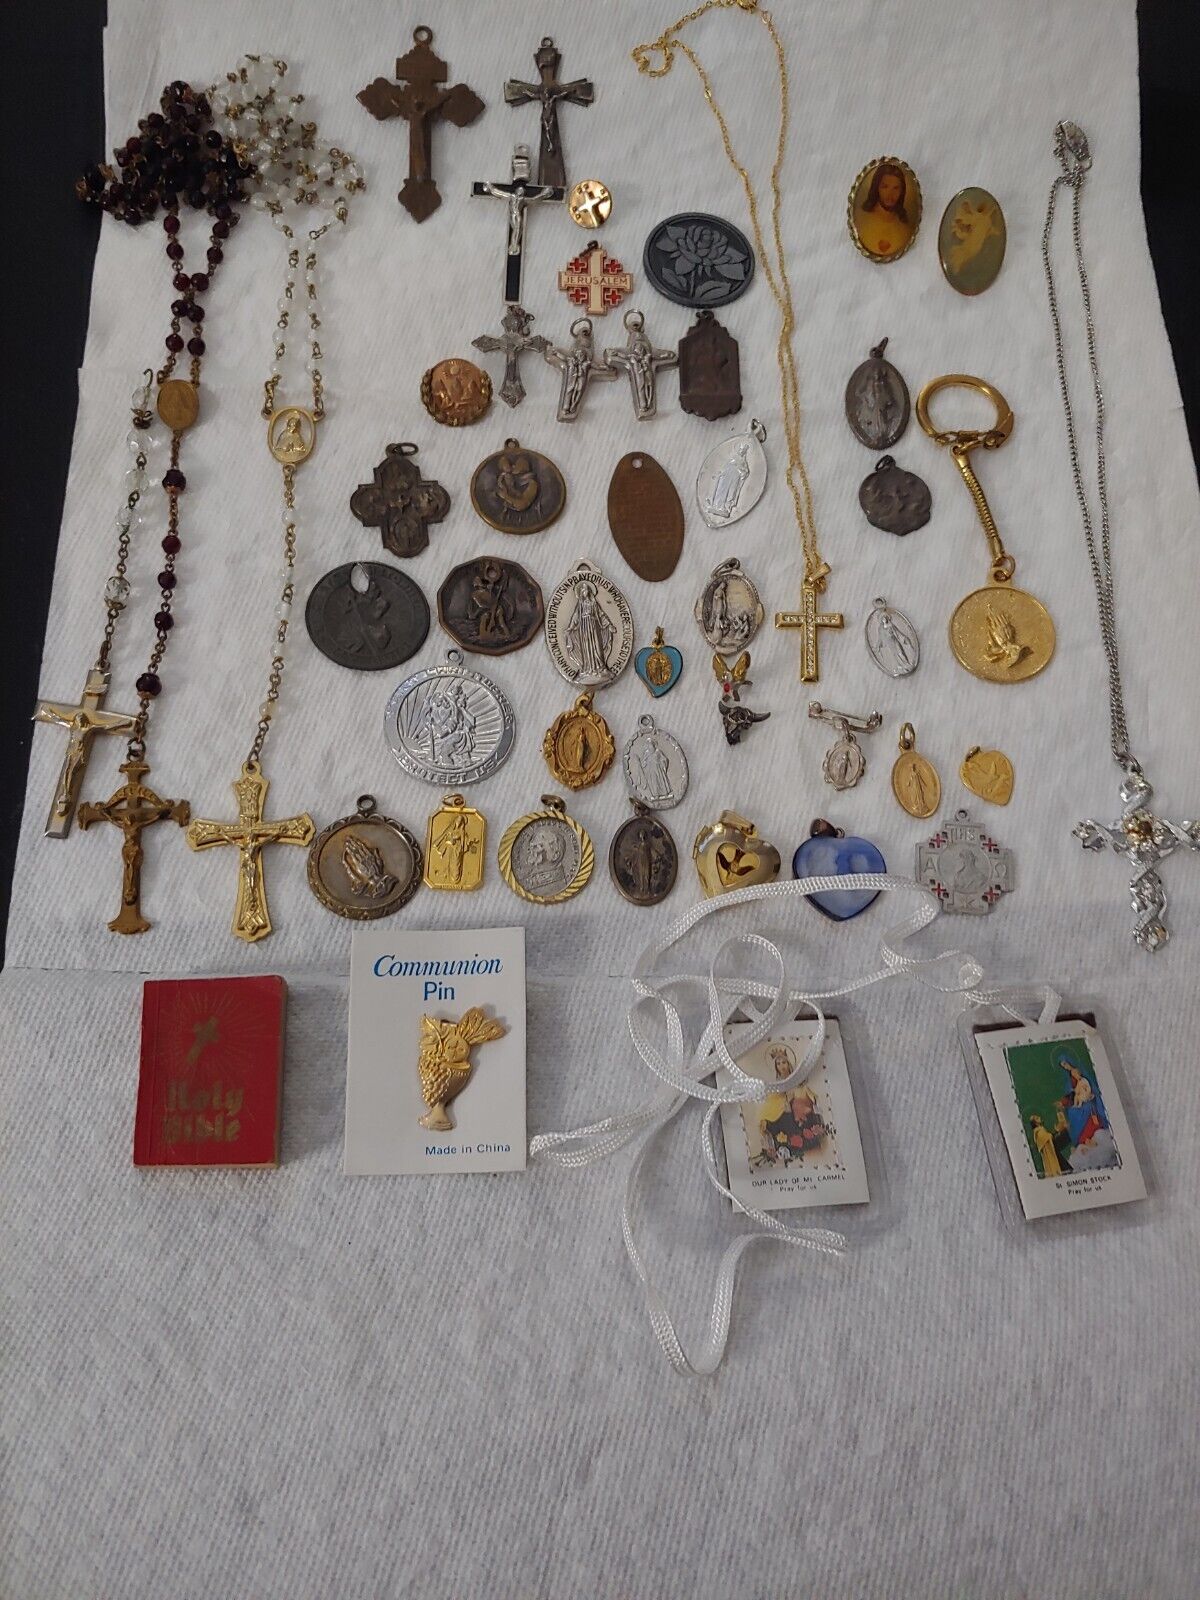 49 VINTAGE CHRISTIAN CATHOLIC MEDALS, ROSARY, PIN,CHARM LOT